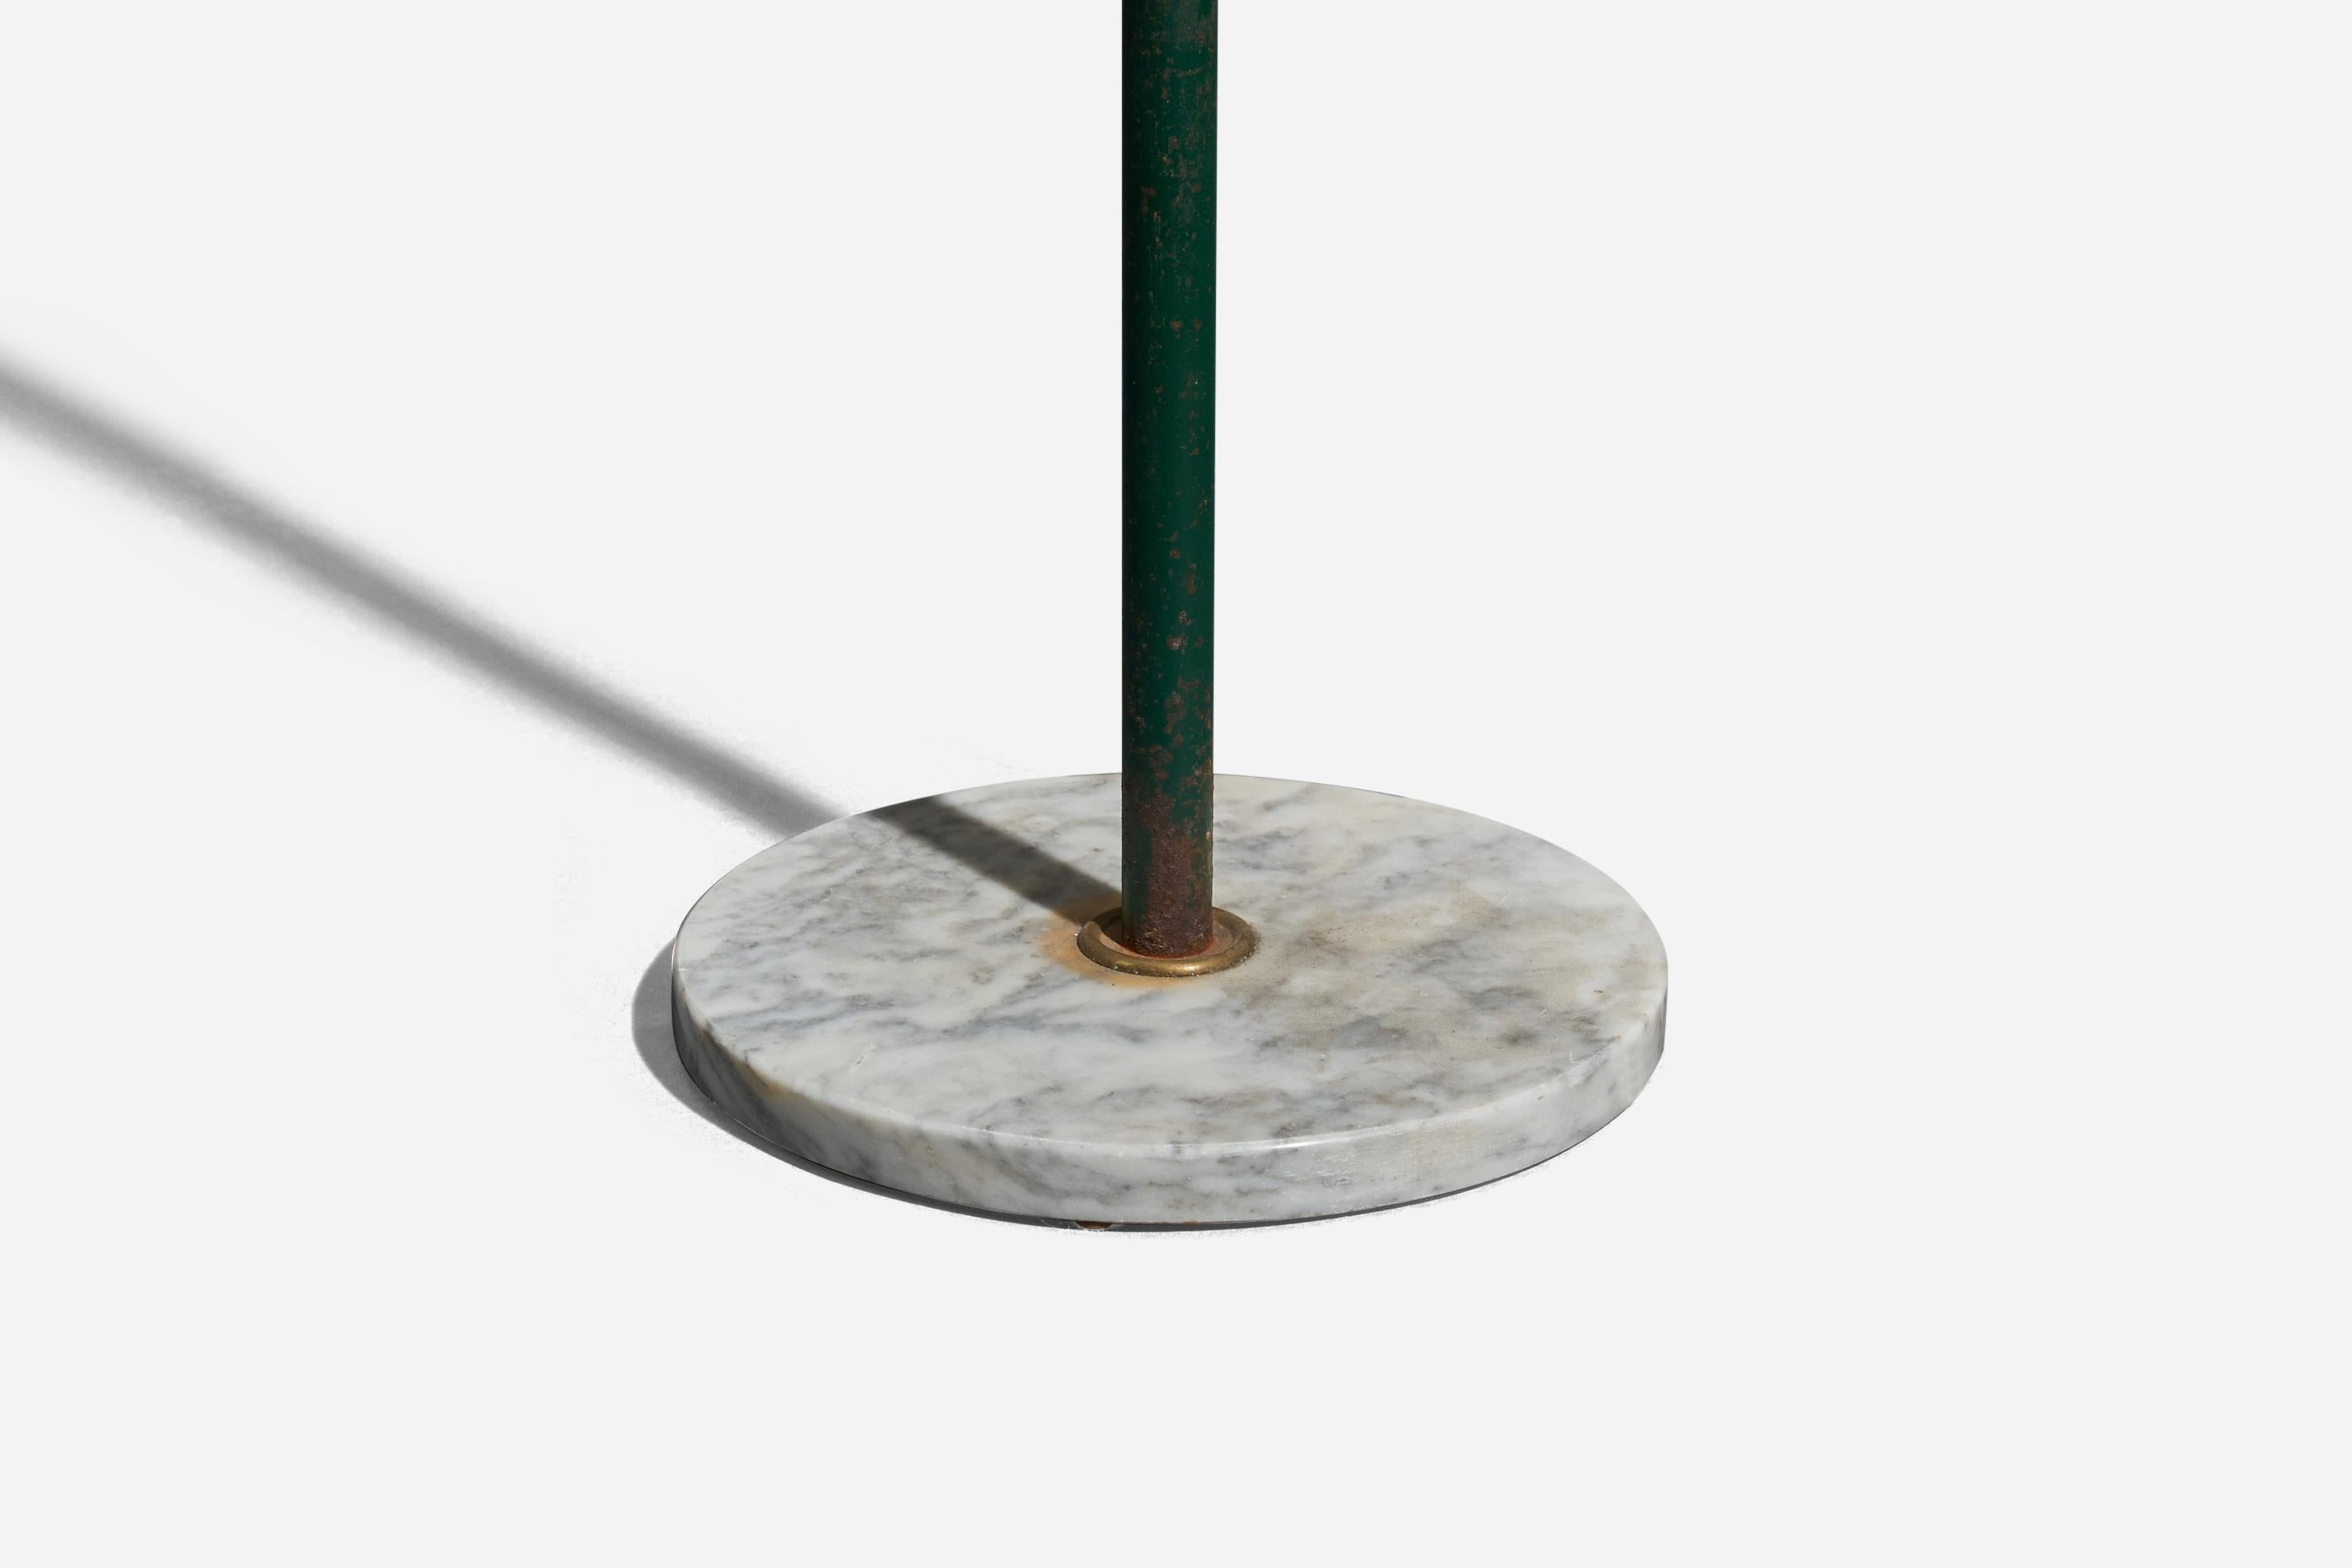 Italian Designer, Adjustab Floor Lamp, Brass, Vinyl, Marble, Resin, Italy, 1950s In Good Condition For Sale In High Point, NC